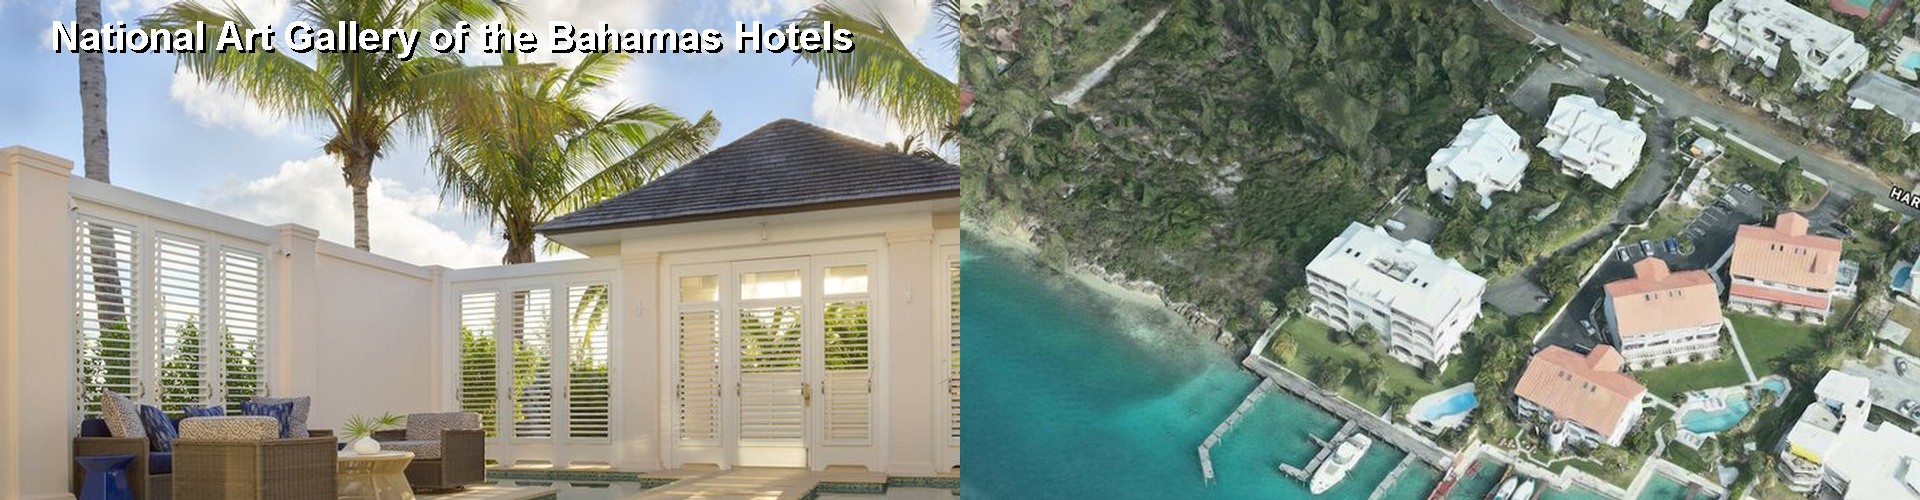 5 Best Hotels near National Art Gallery of the Bahamas